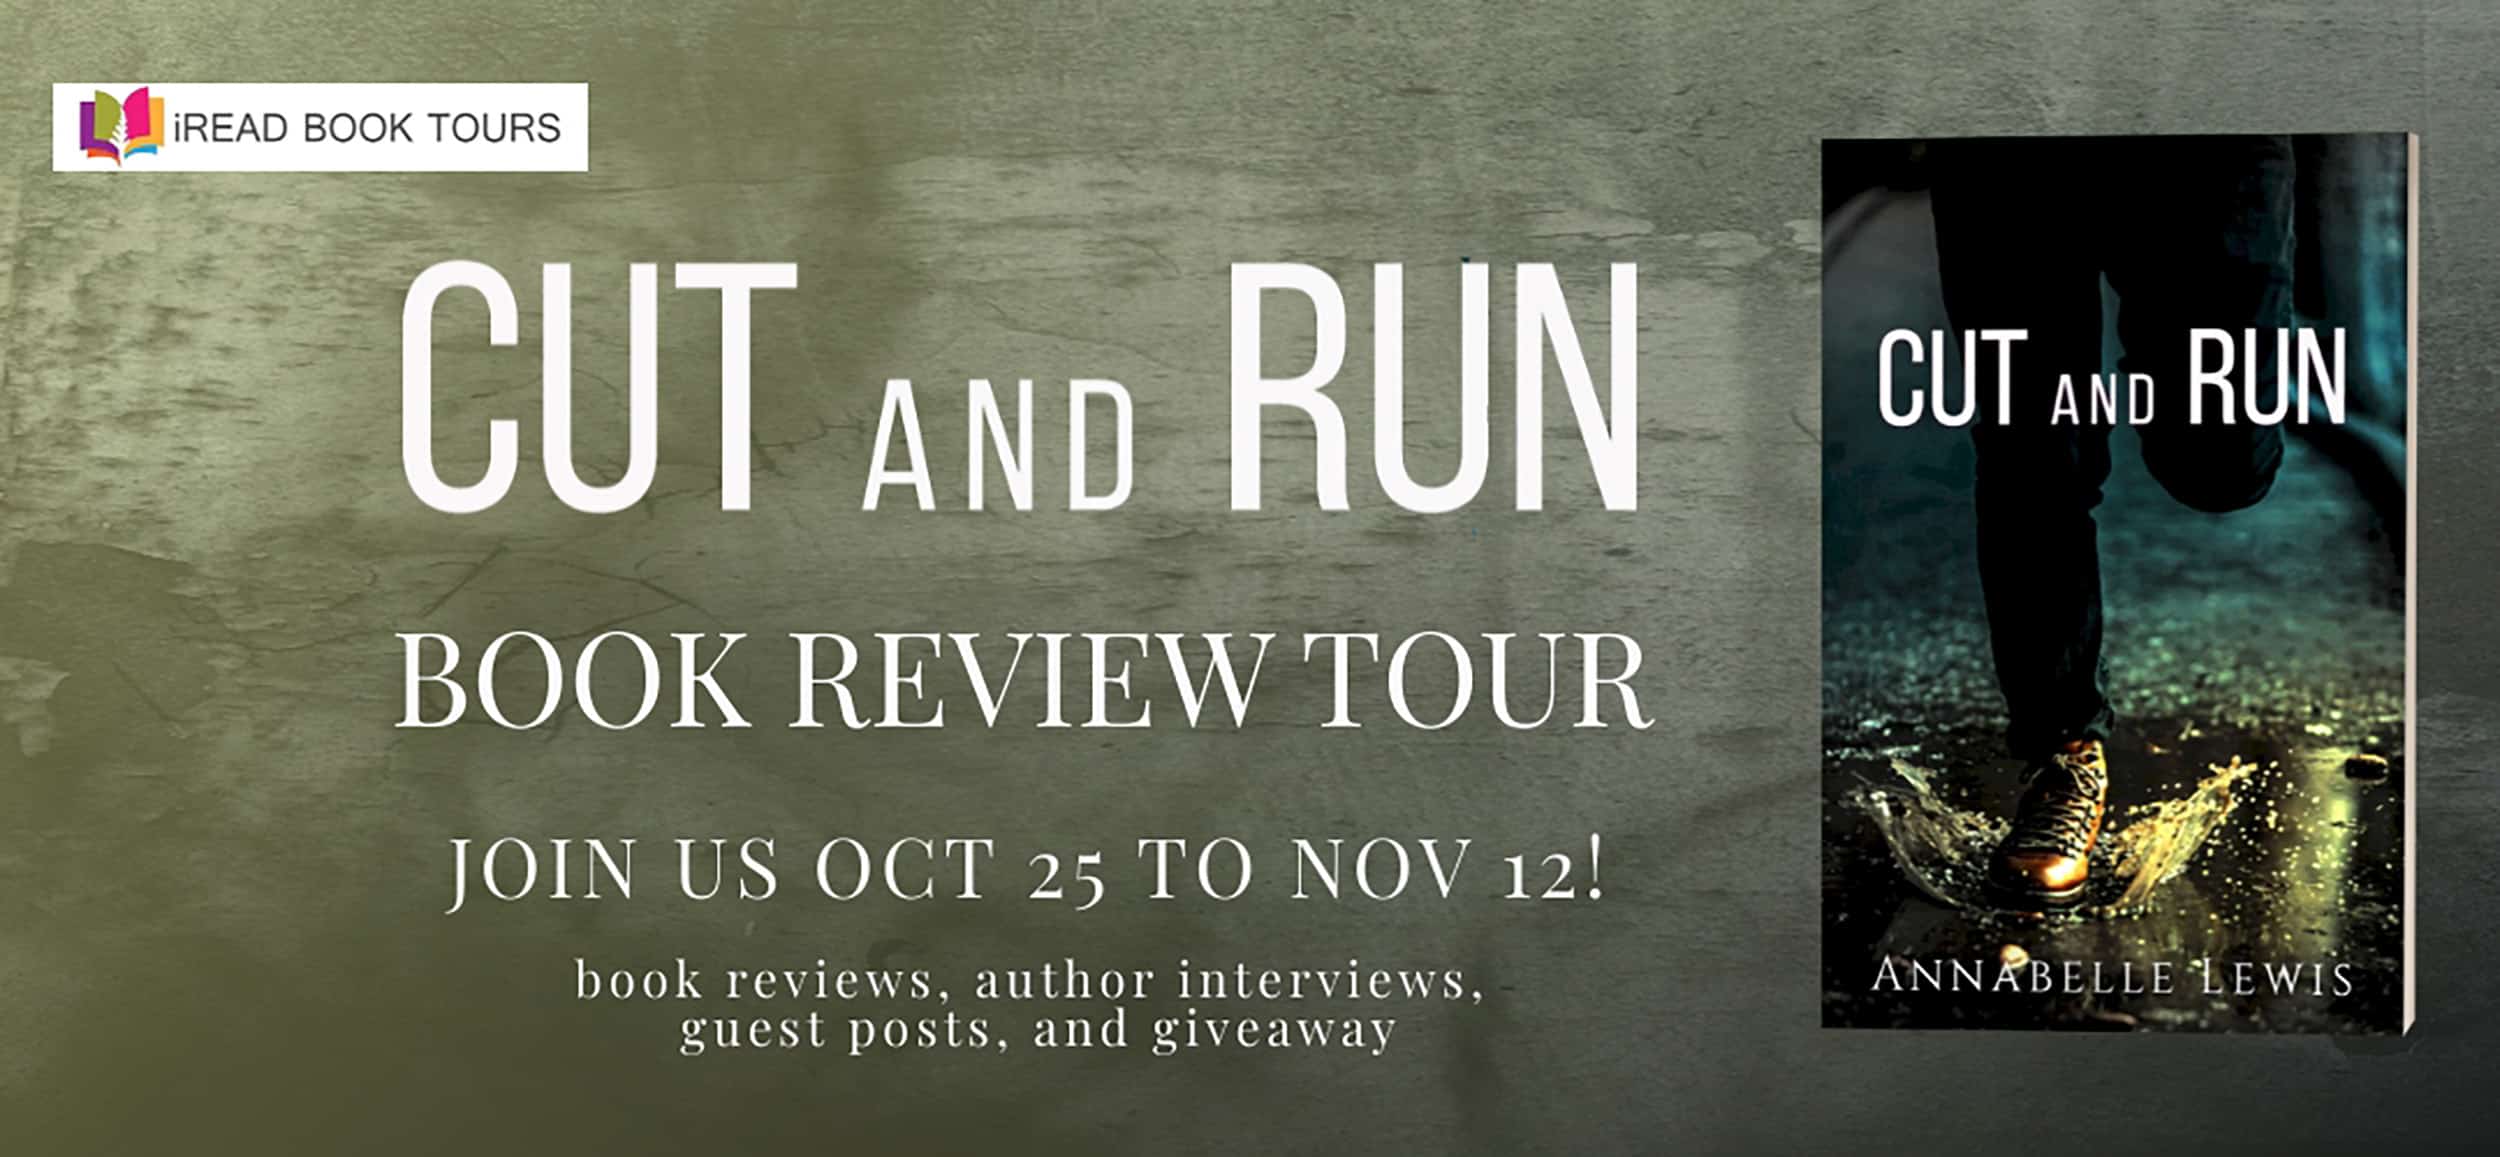 Cut and Run by Annabelle Lewis | Review, Author Interview, & Giveaway